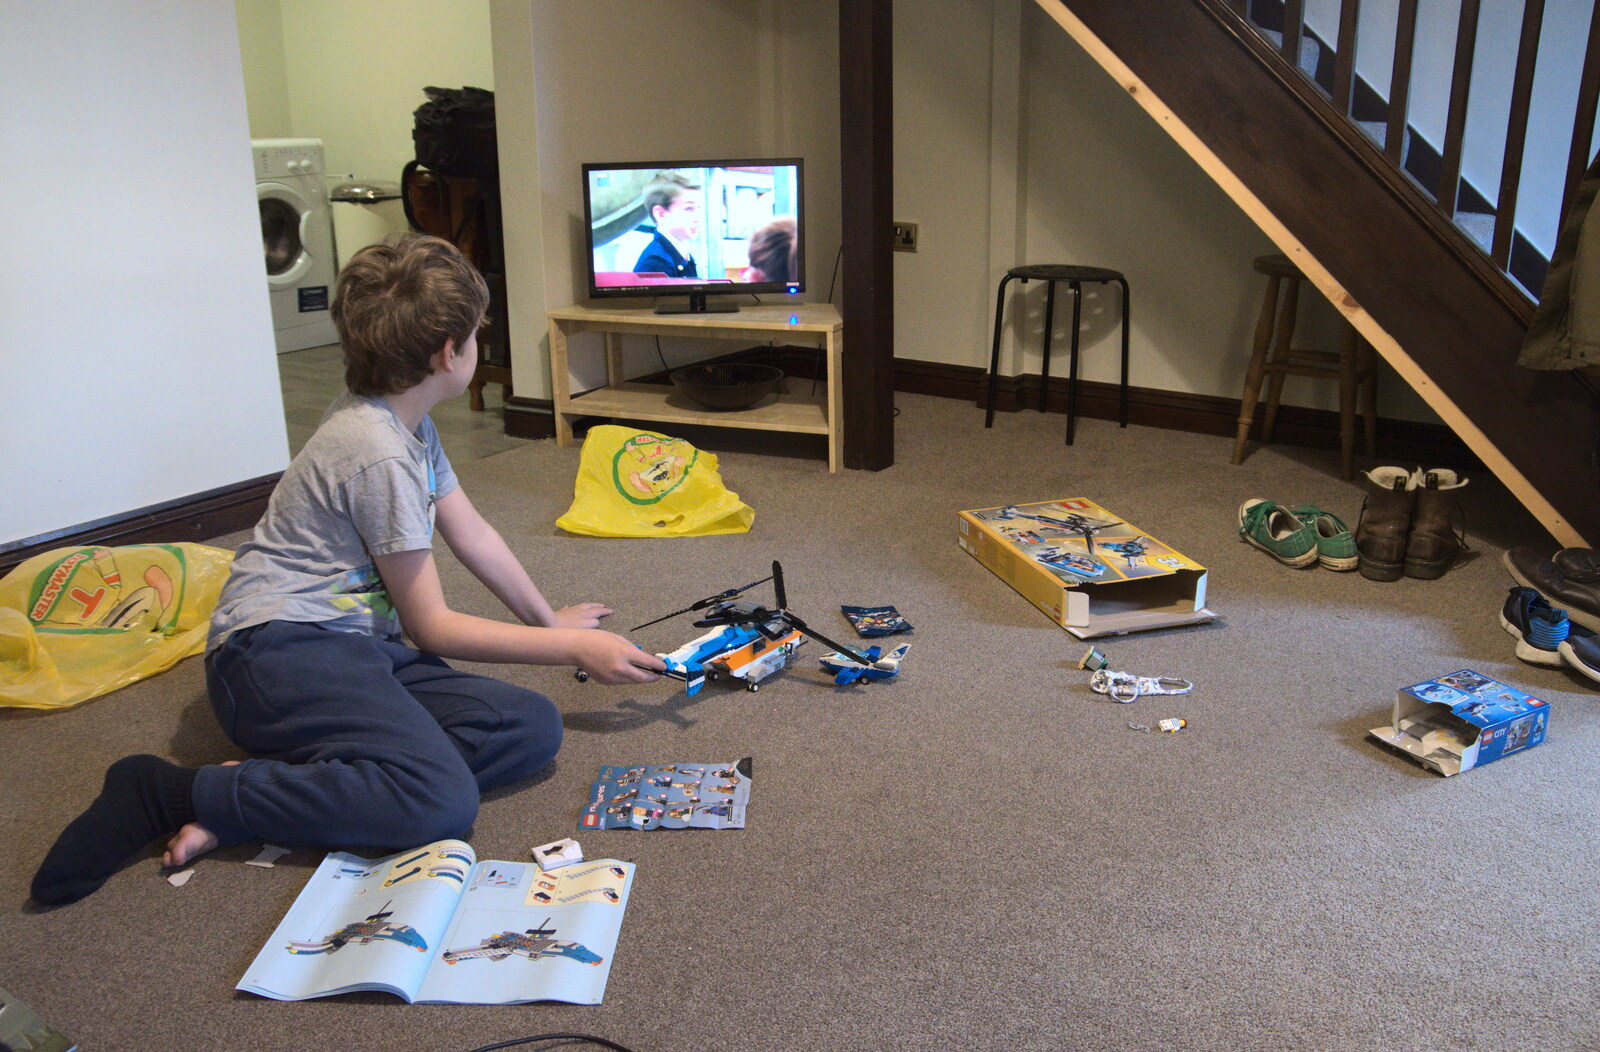 Fred plays with Lego and watches telly from A Trip to Sandringham Estate, Norfolk - 31st October 2020